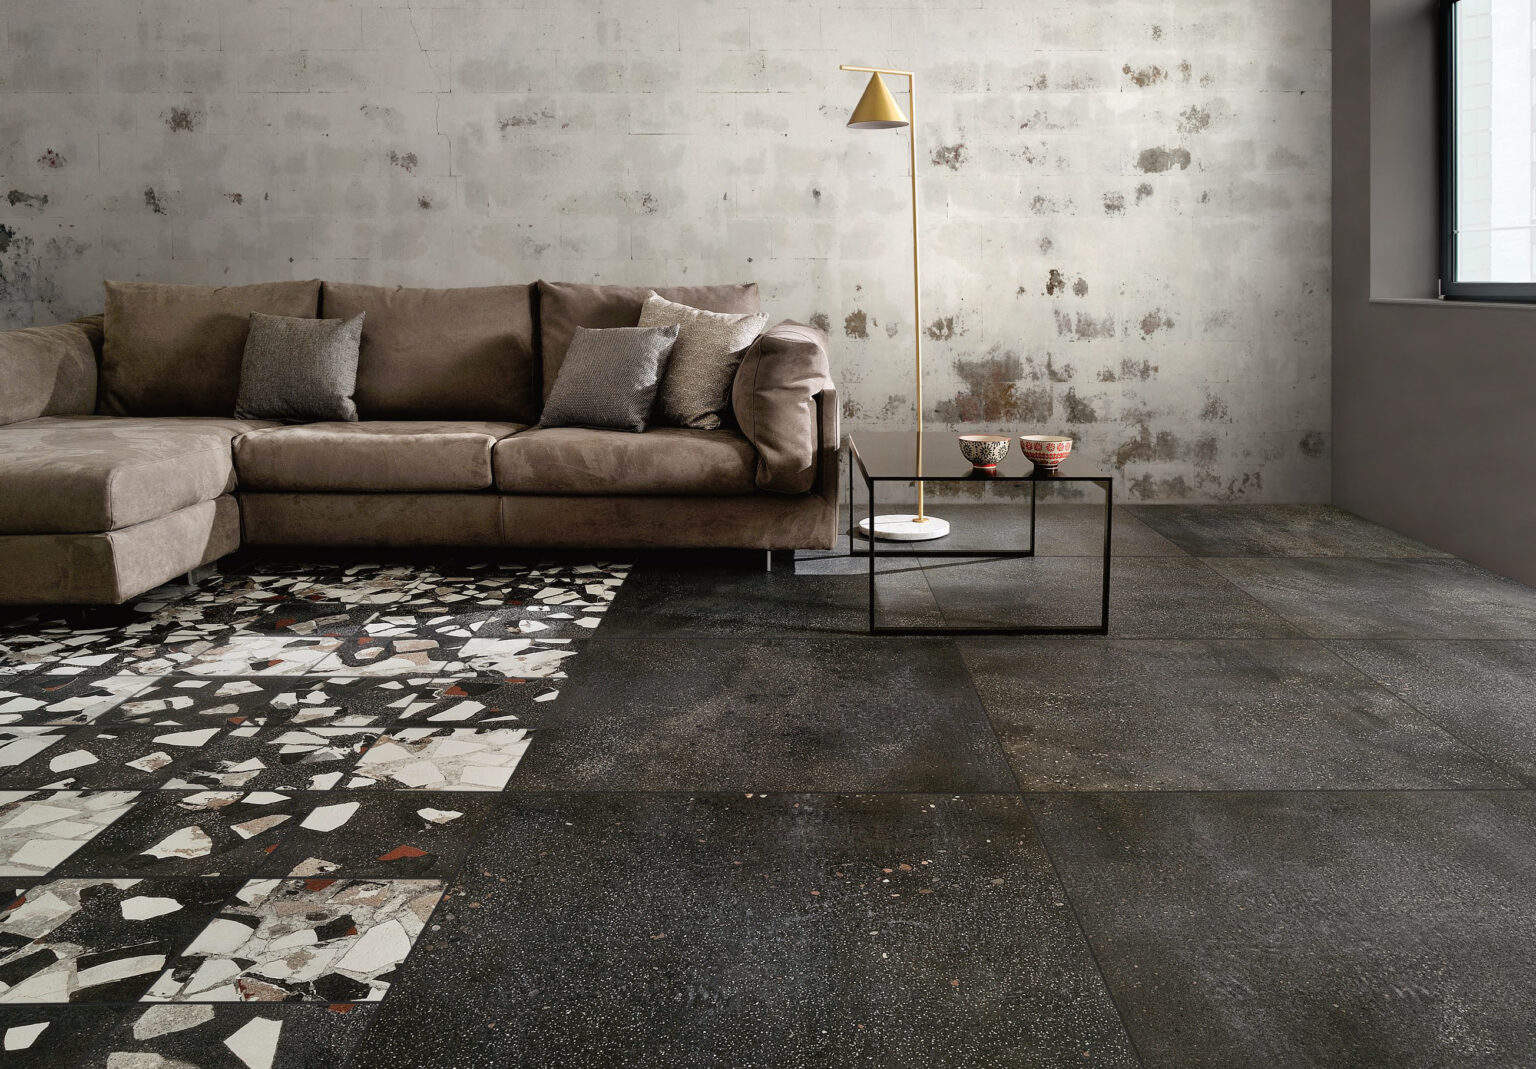 Porcelain Tile Concrete Look - Fioranese - I Cocci - The Shards Page 11 Image 0001